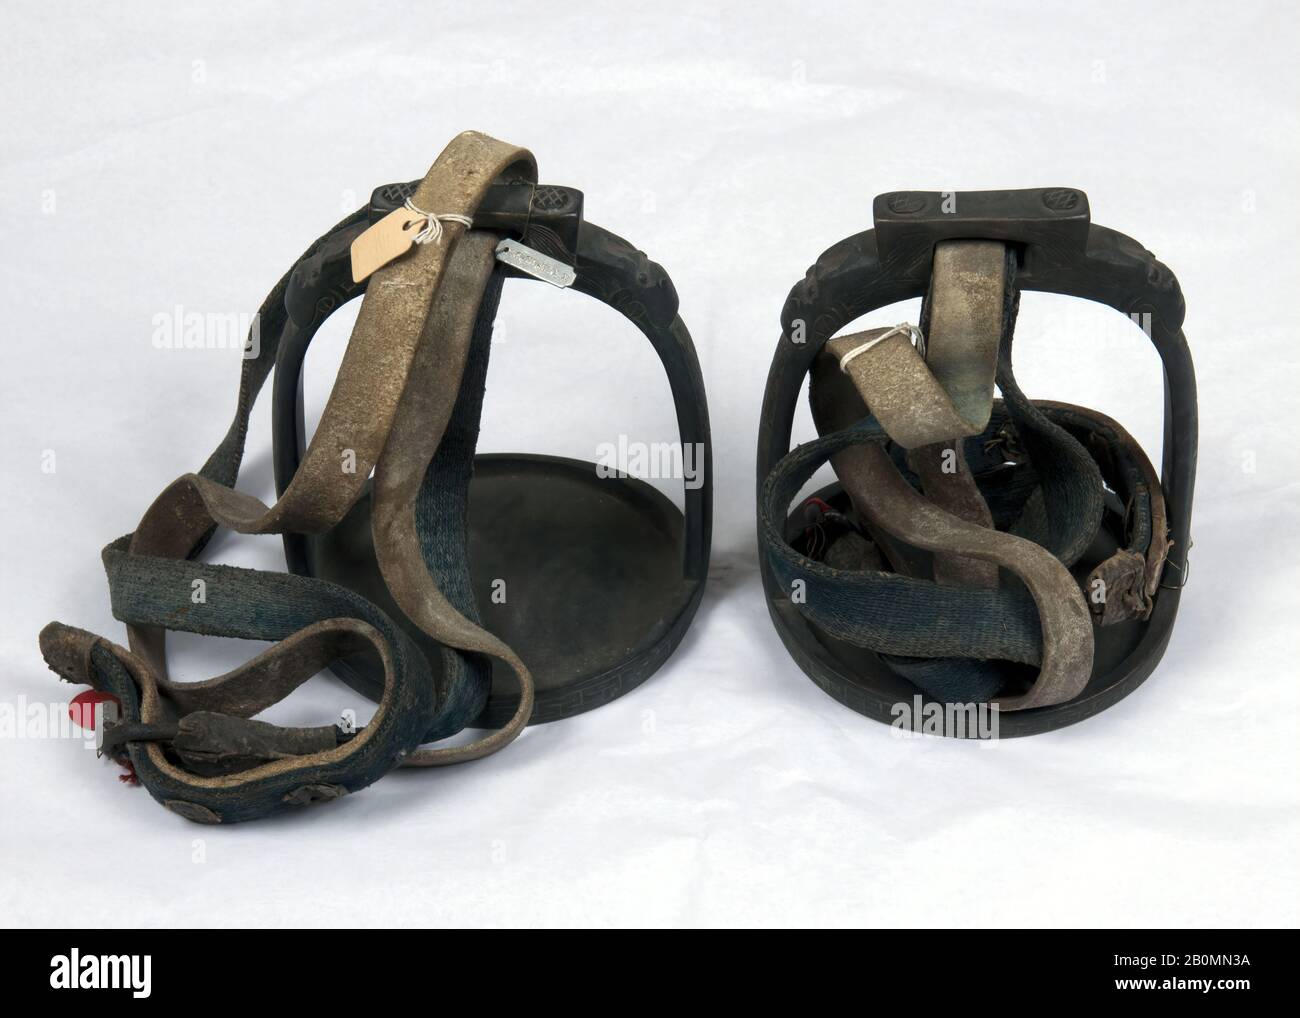 Horse Masters Classic Bent Leg Safety Stirrup Iron and Treads 2 Sizes Available 